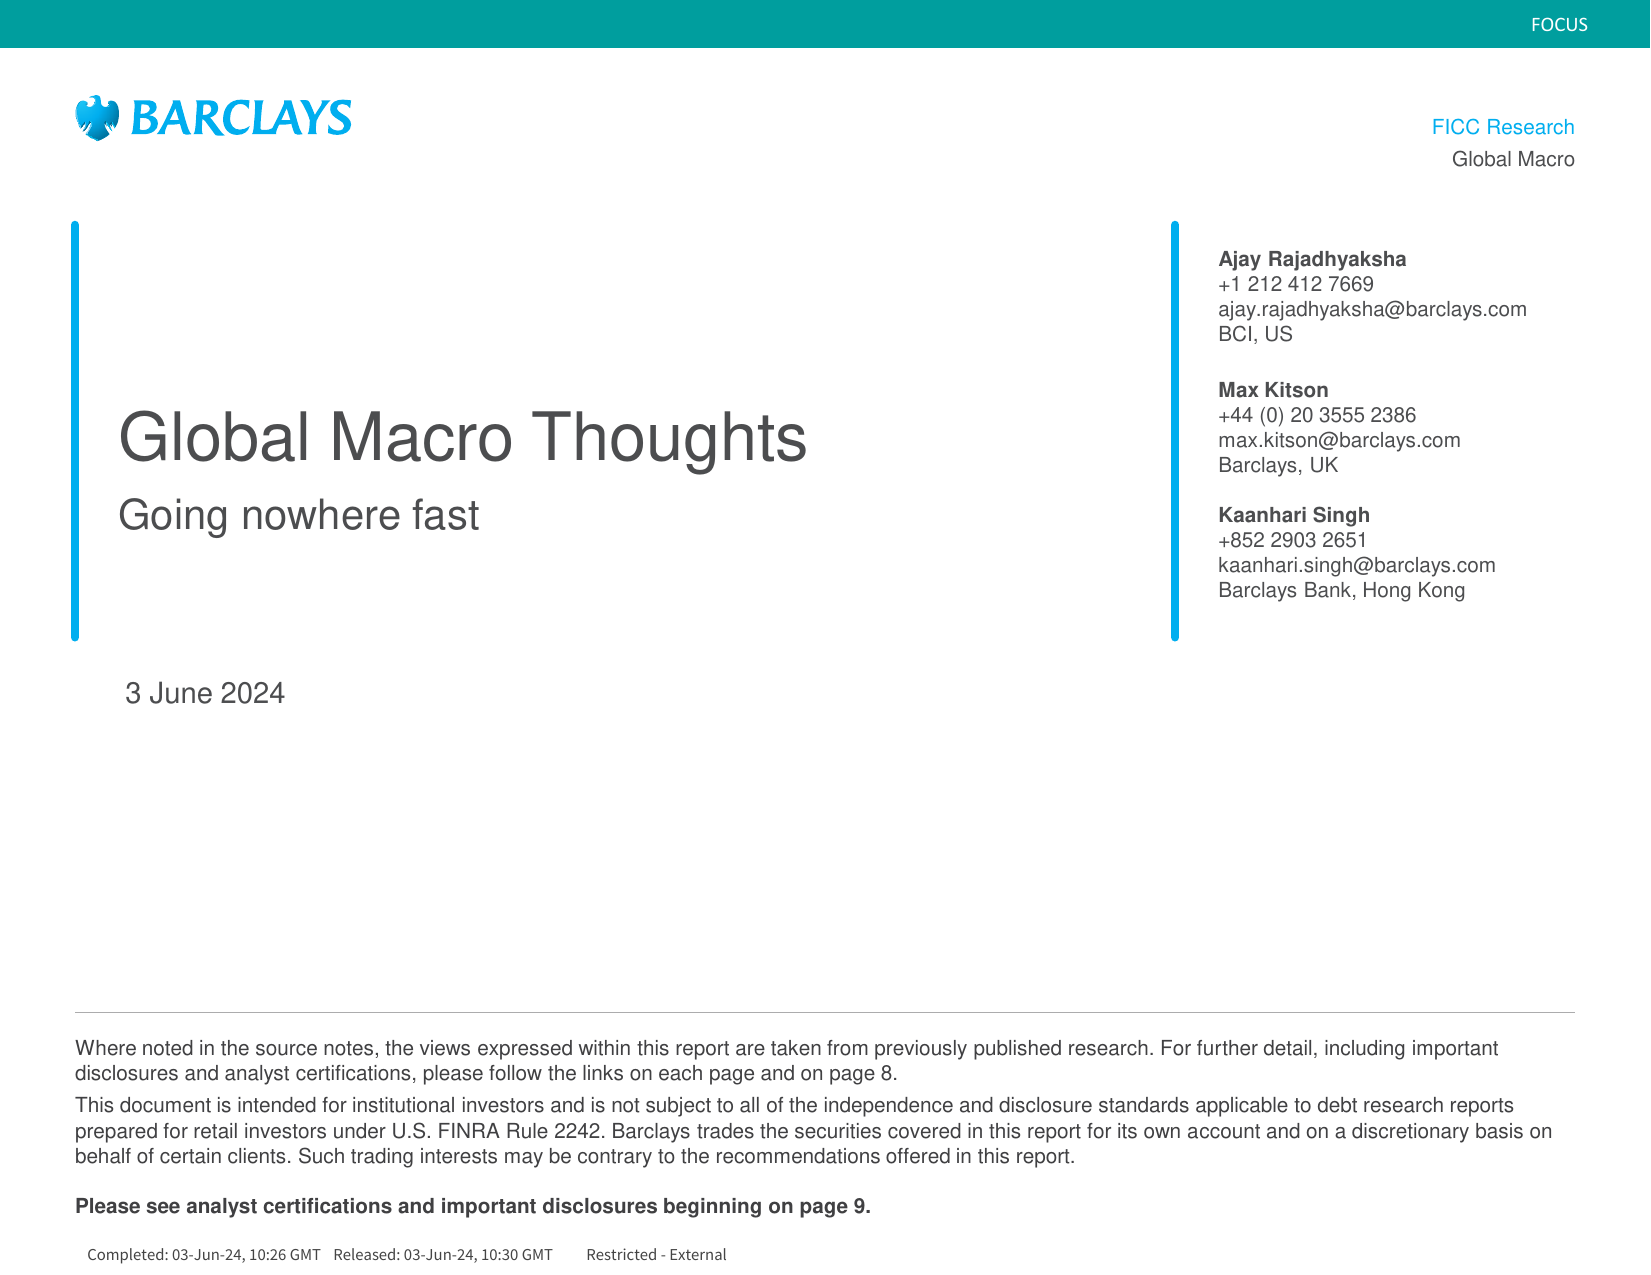 Barclays_Global_Macro_Thoughts_Going_nowhere_fast.pdf